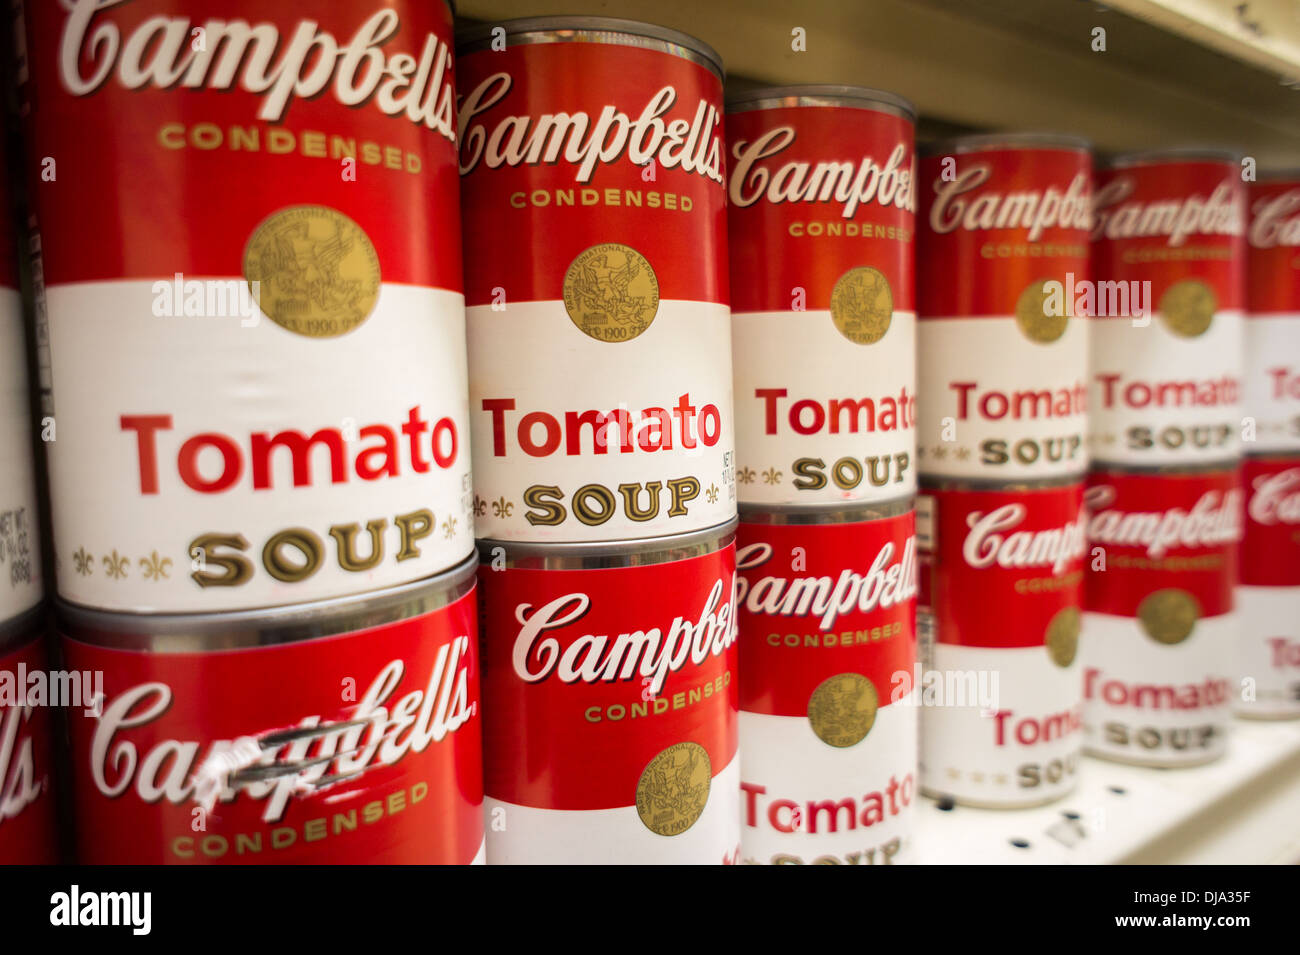 Cans of Campbell's Tomato Soup are seen in a supermarket in New York Stock Photo